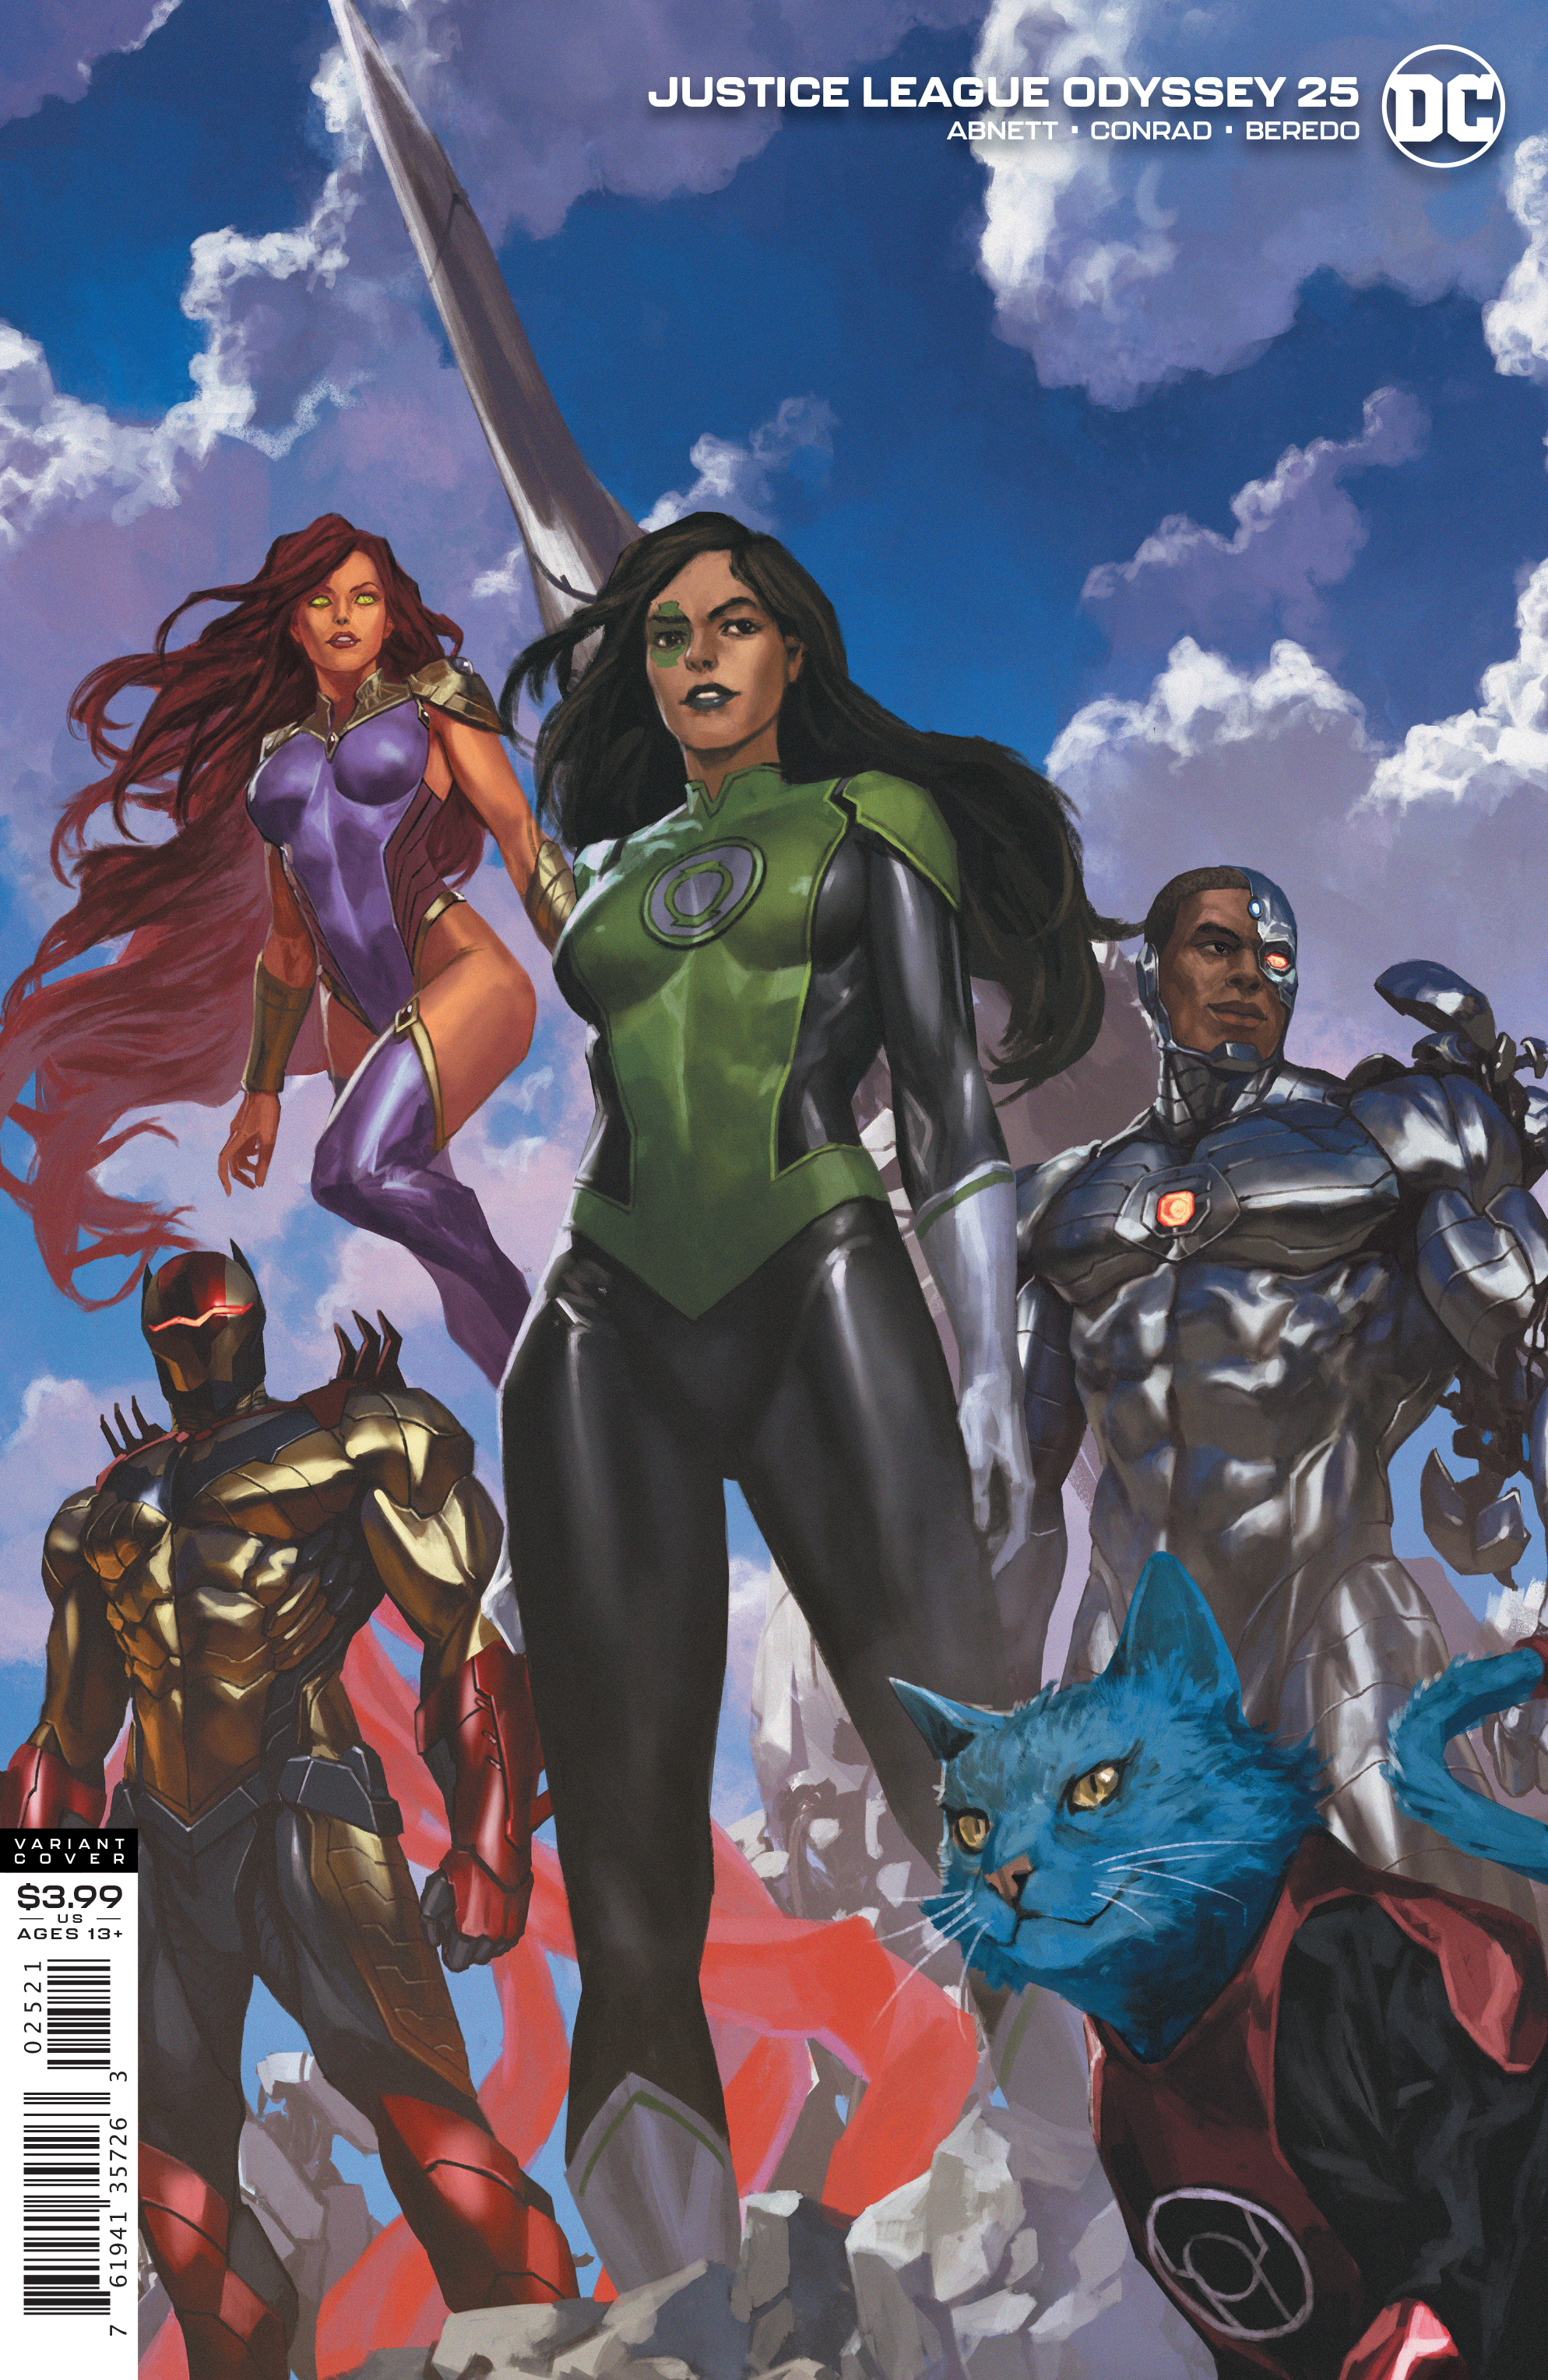 Justice League Odyssey #25 Cover B Skan Variant